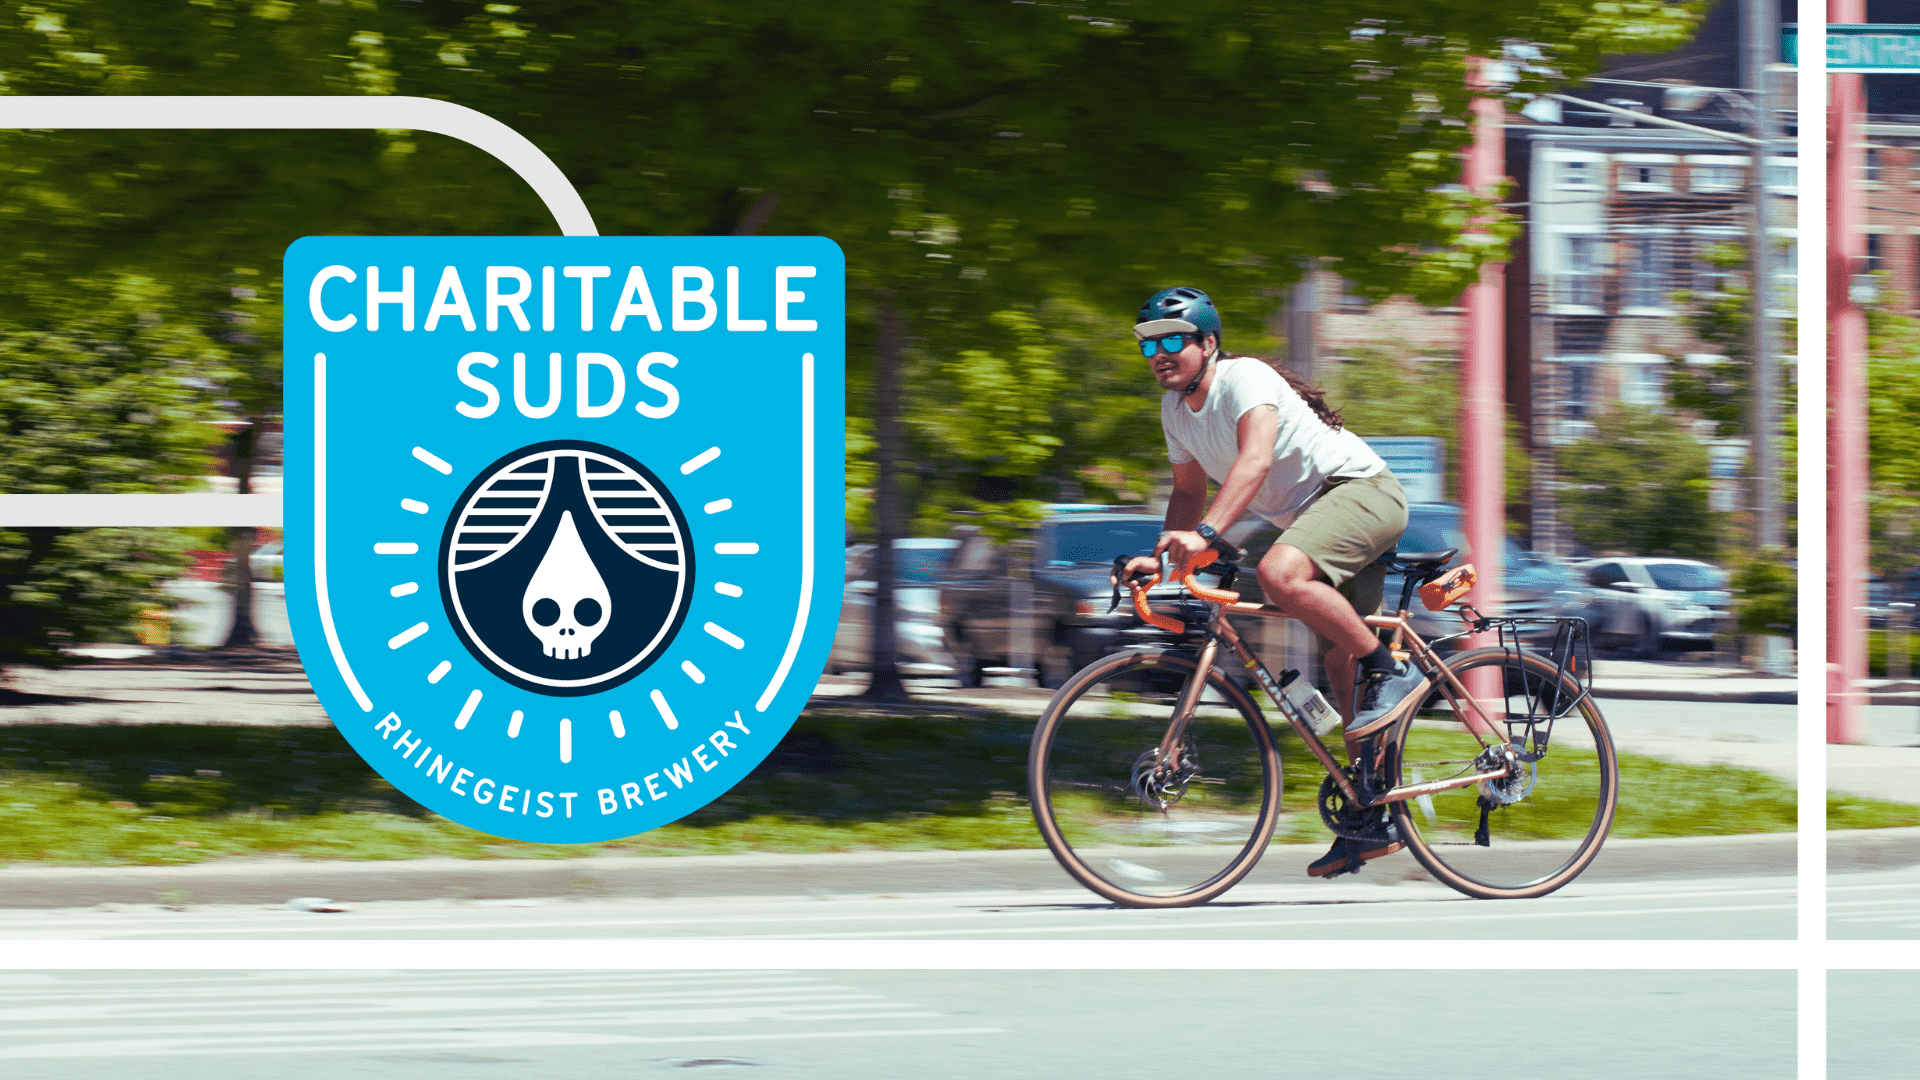 Charitable Suds and Tri-State Trails